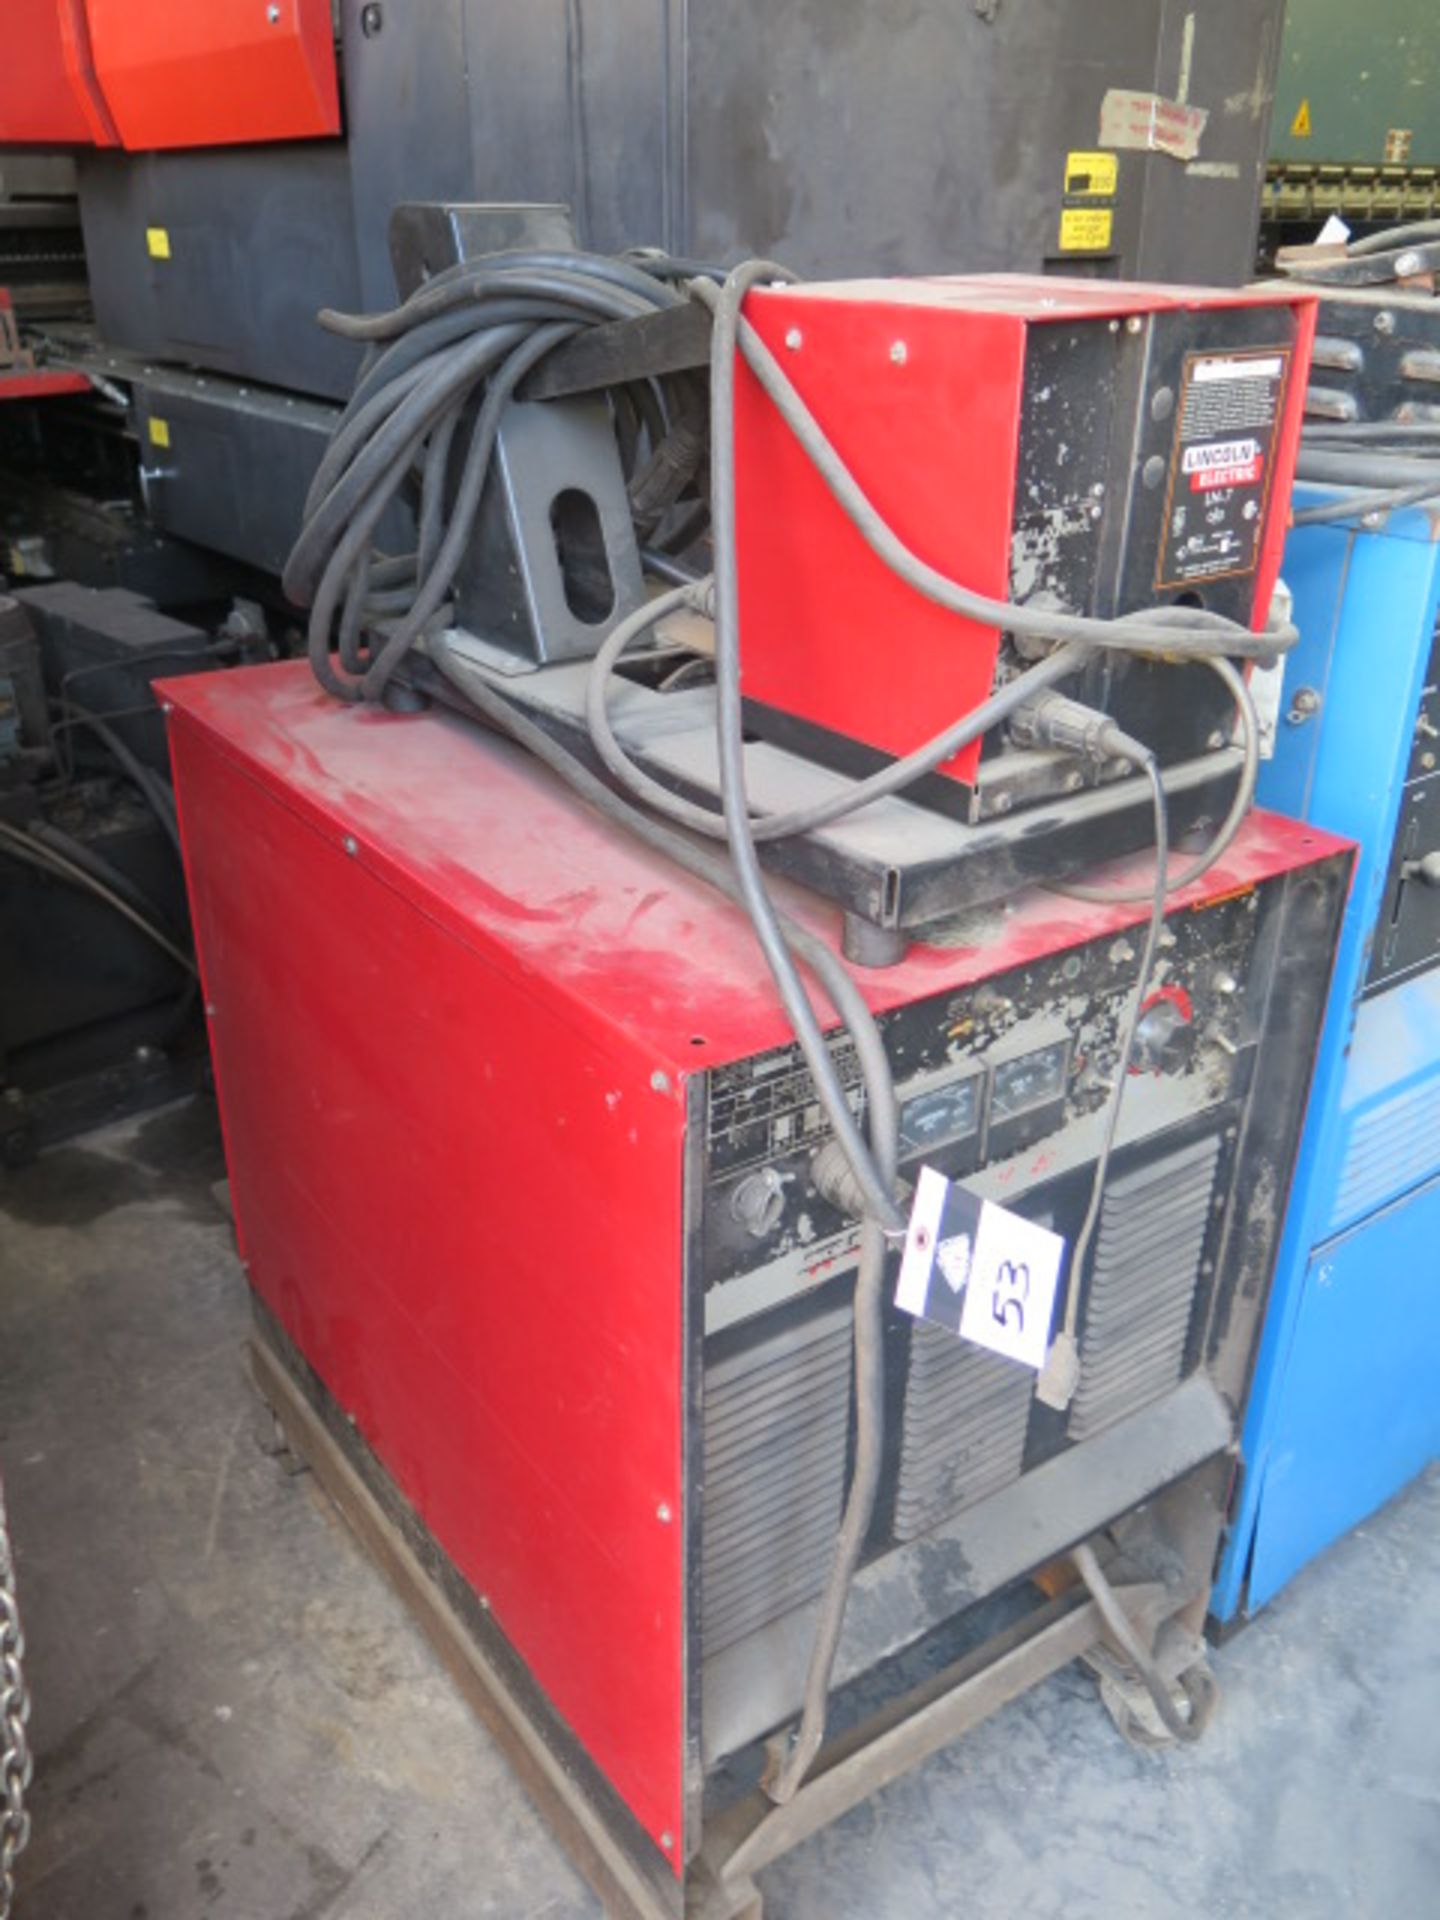 Lincoln CV-400 Arc Welding Power Source s/n U1971008352 w/ Lincoln LN-7 Wire Feeder - Image 3 of 8